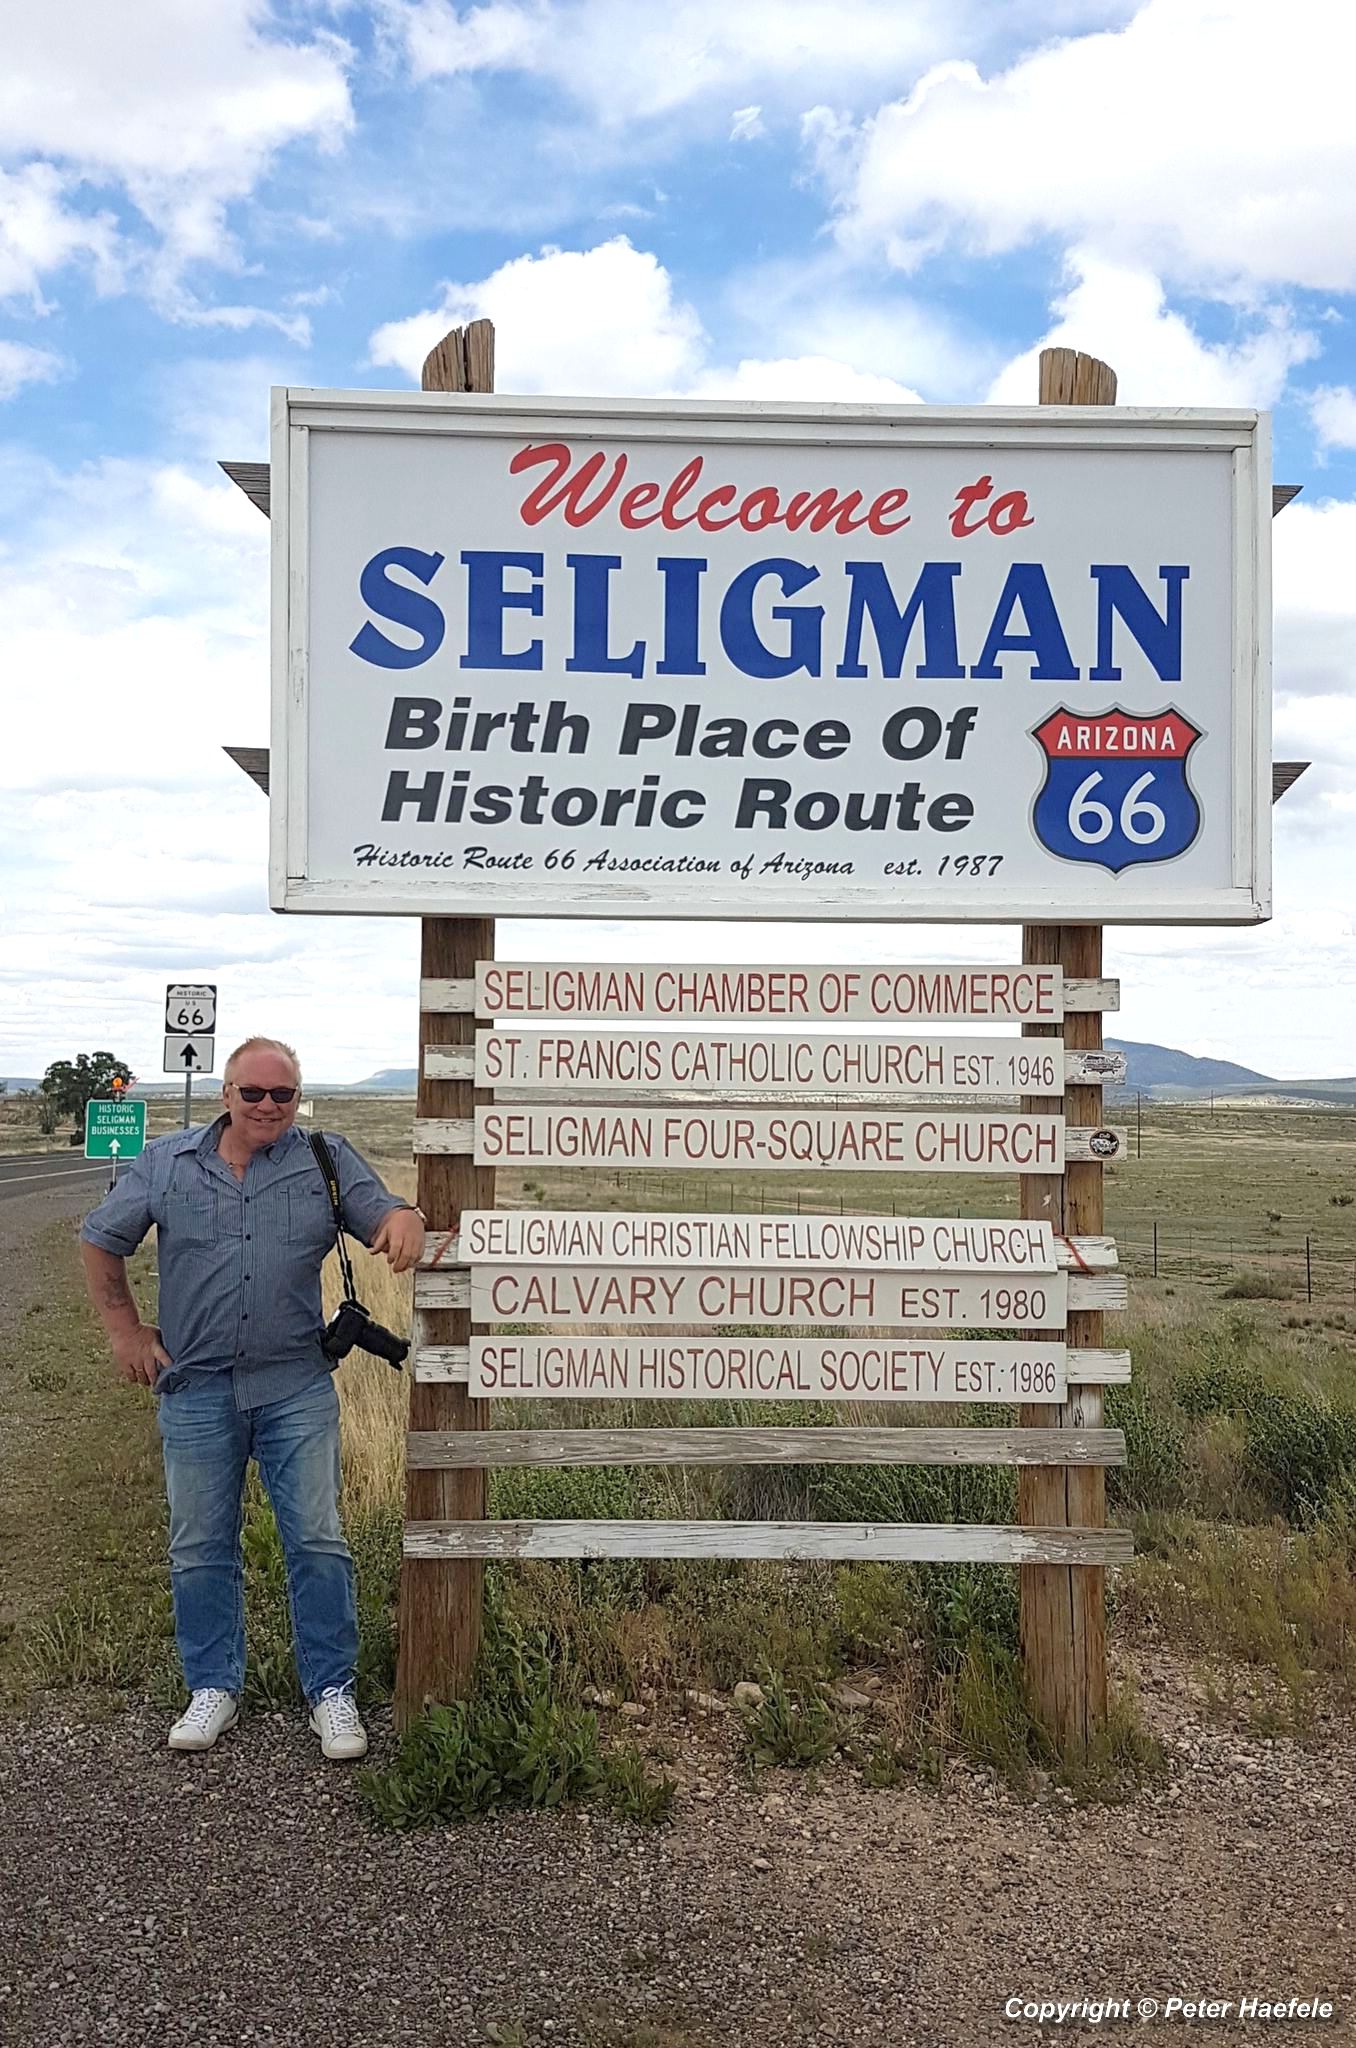 Roadtrip USA - Welcome to Seligman - Birthplace of Historic Route 66